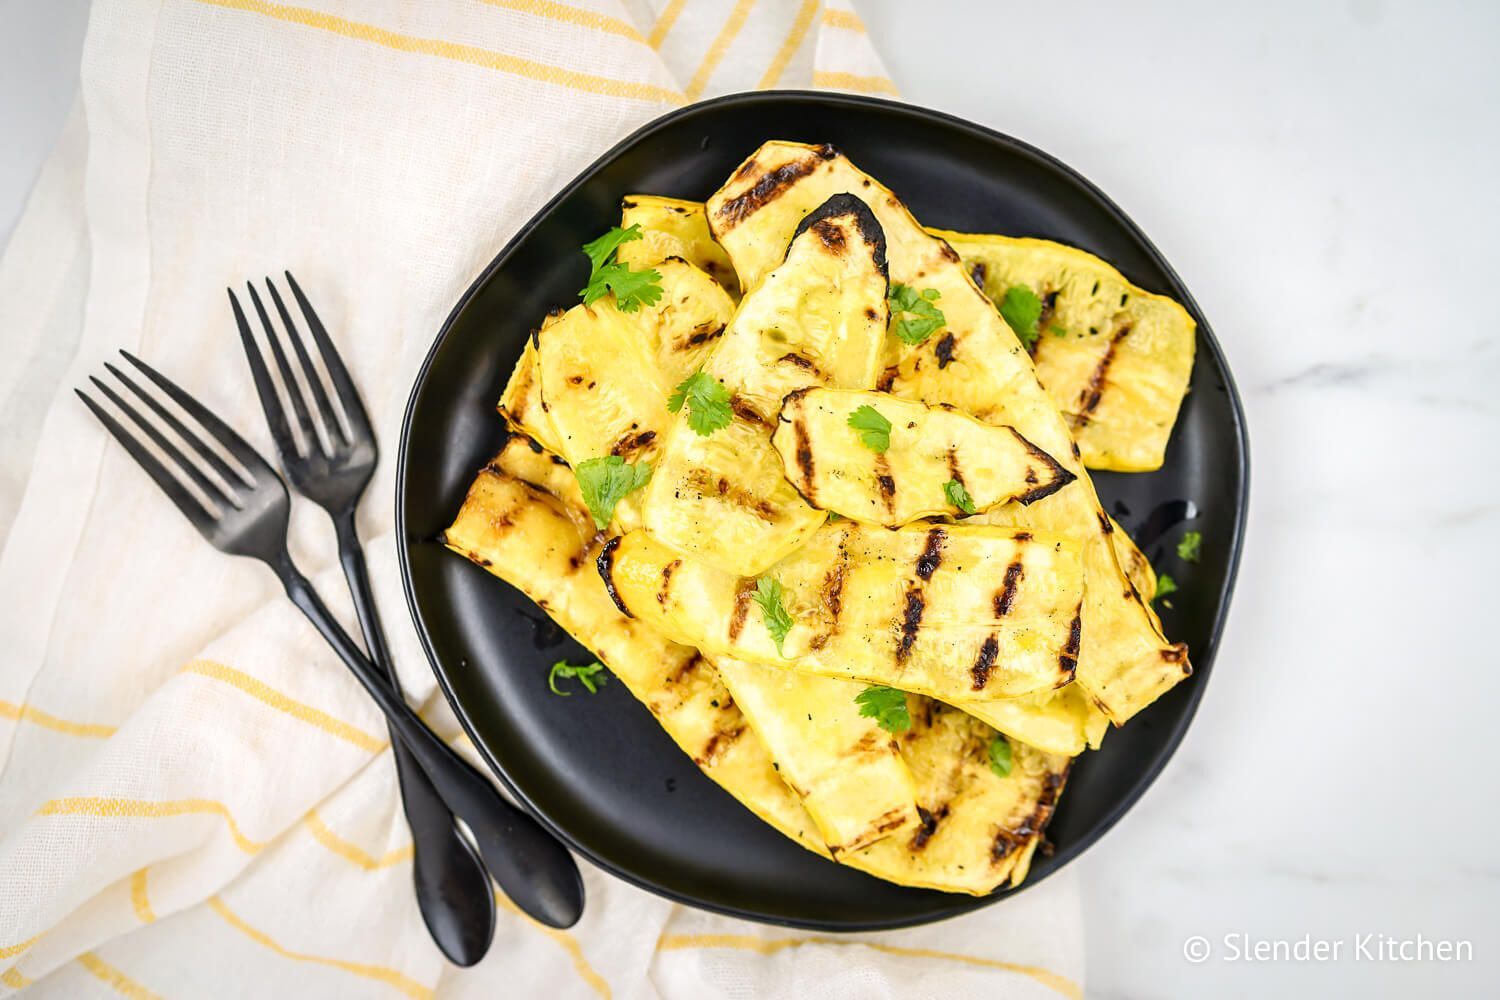 Grilled yellow squash on a black plate sprinkled with parsley.